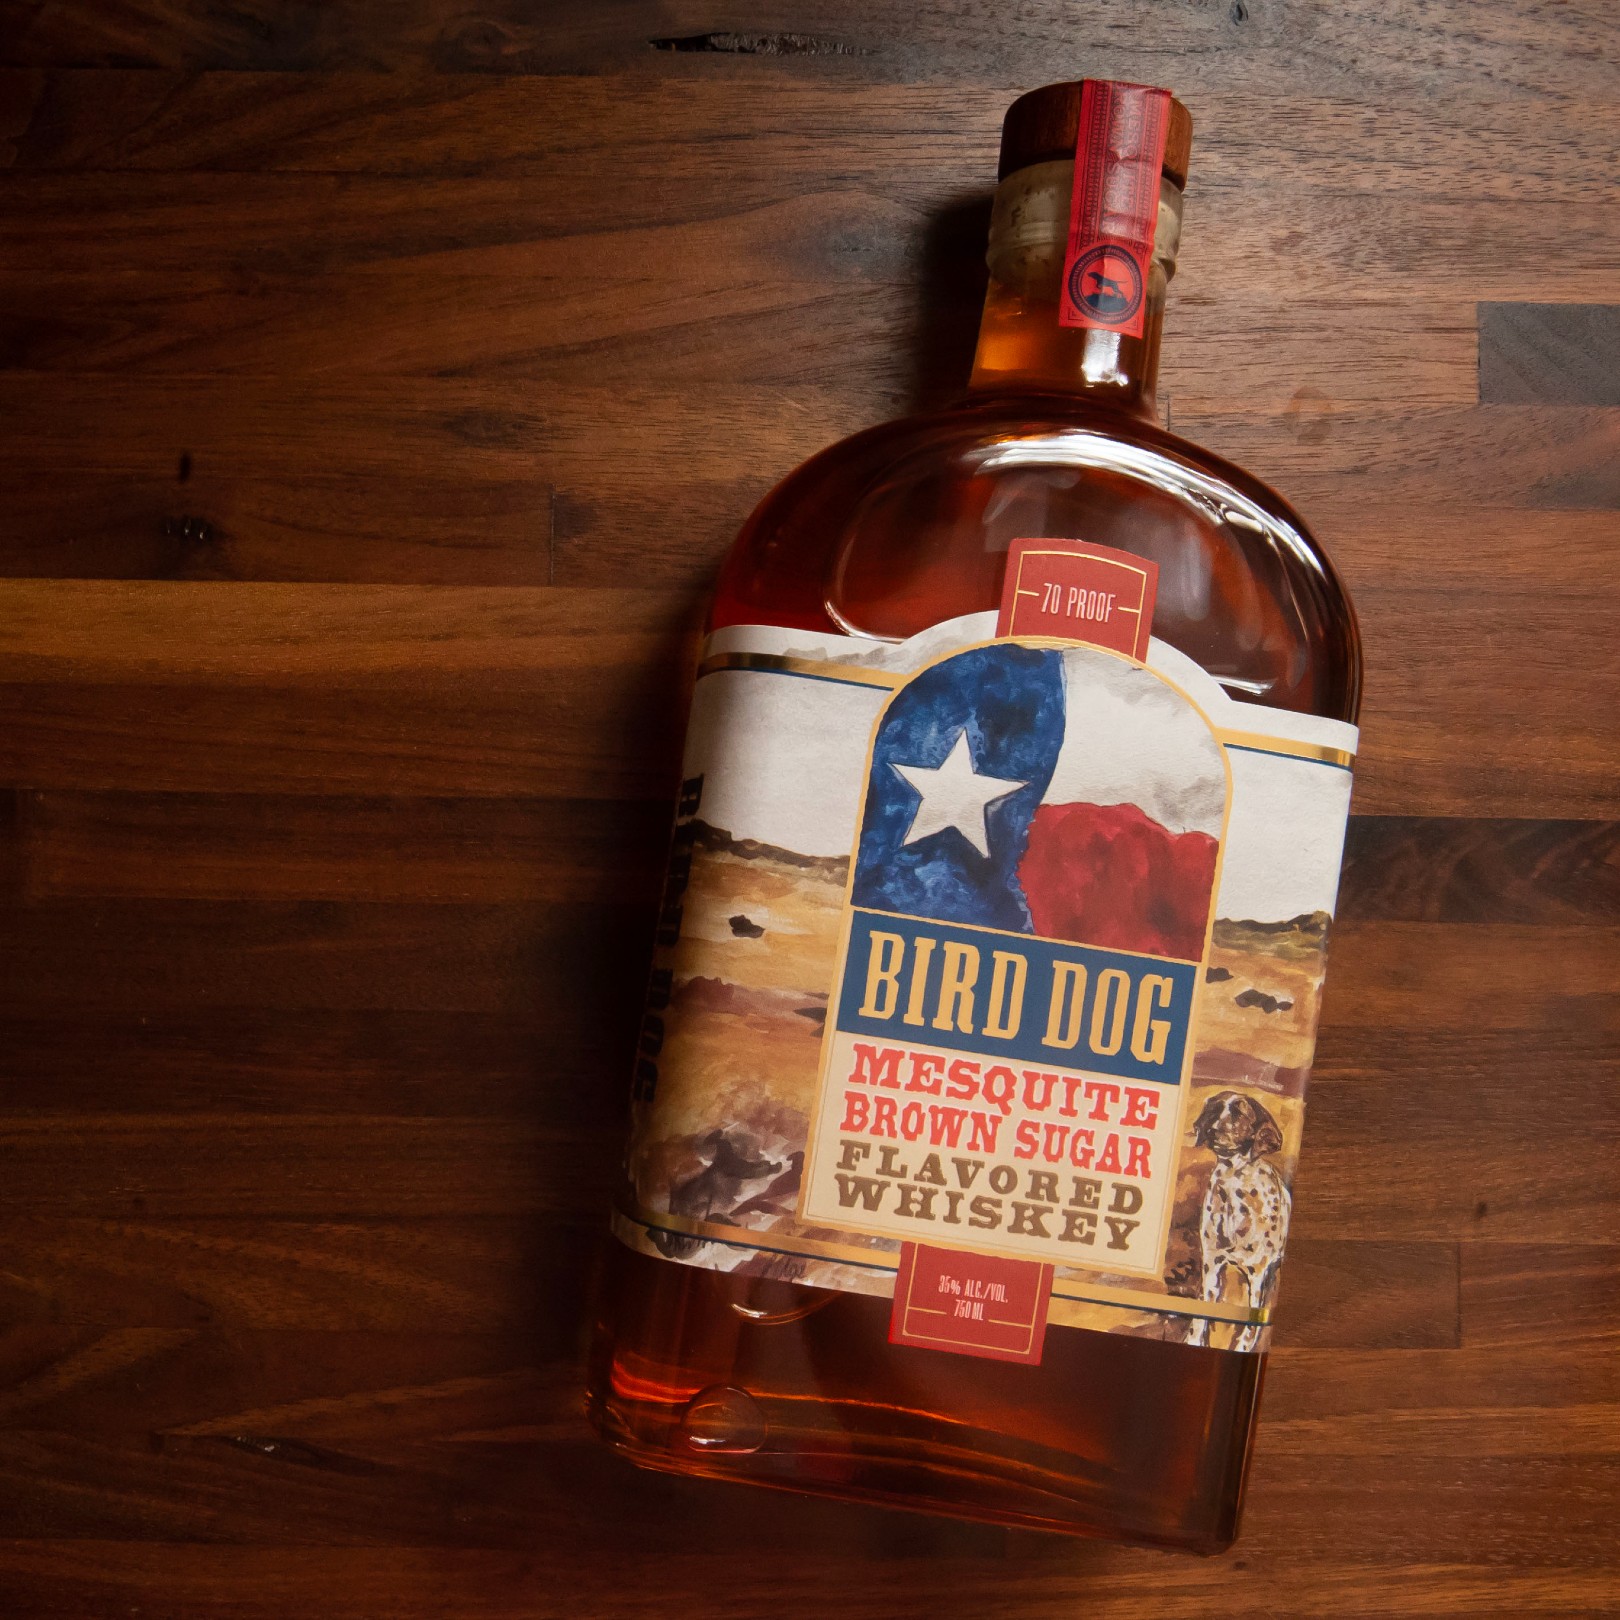 Bottle of Bird Dog Mesquite Brown Sugar laying on wood background